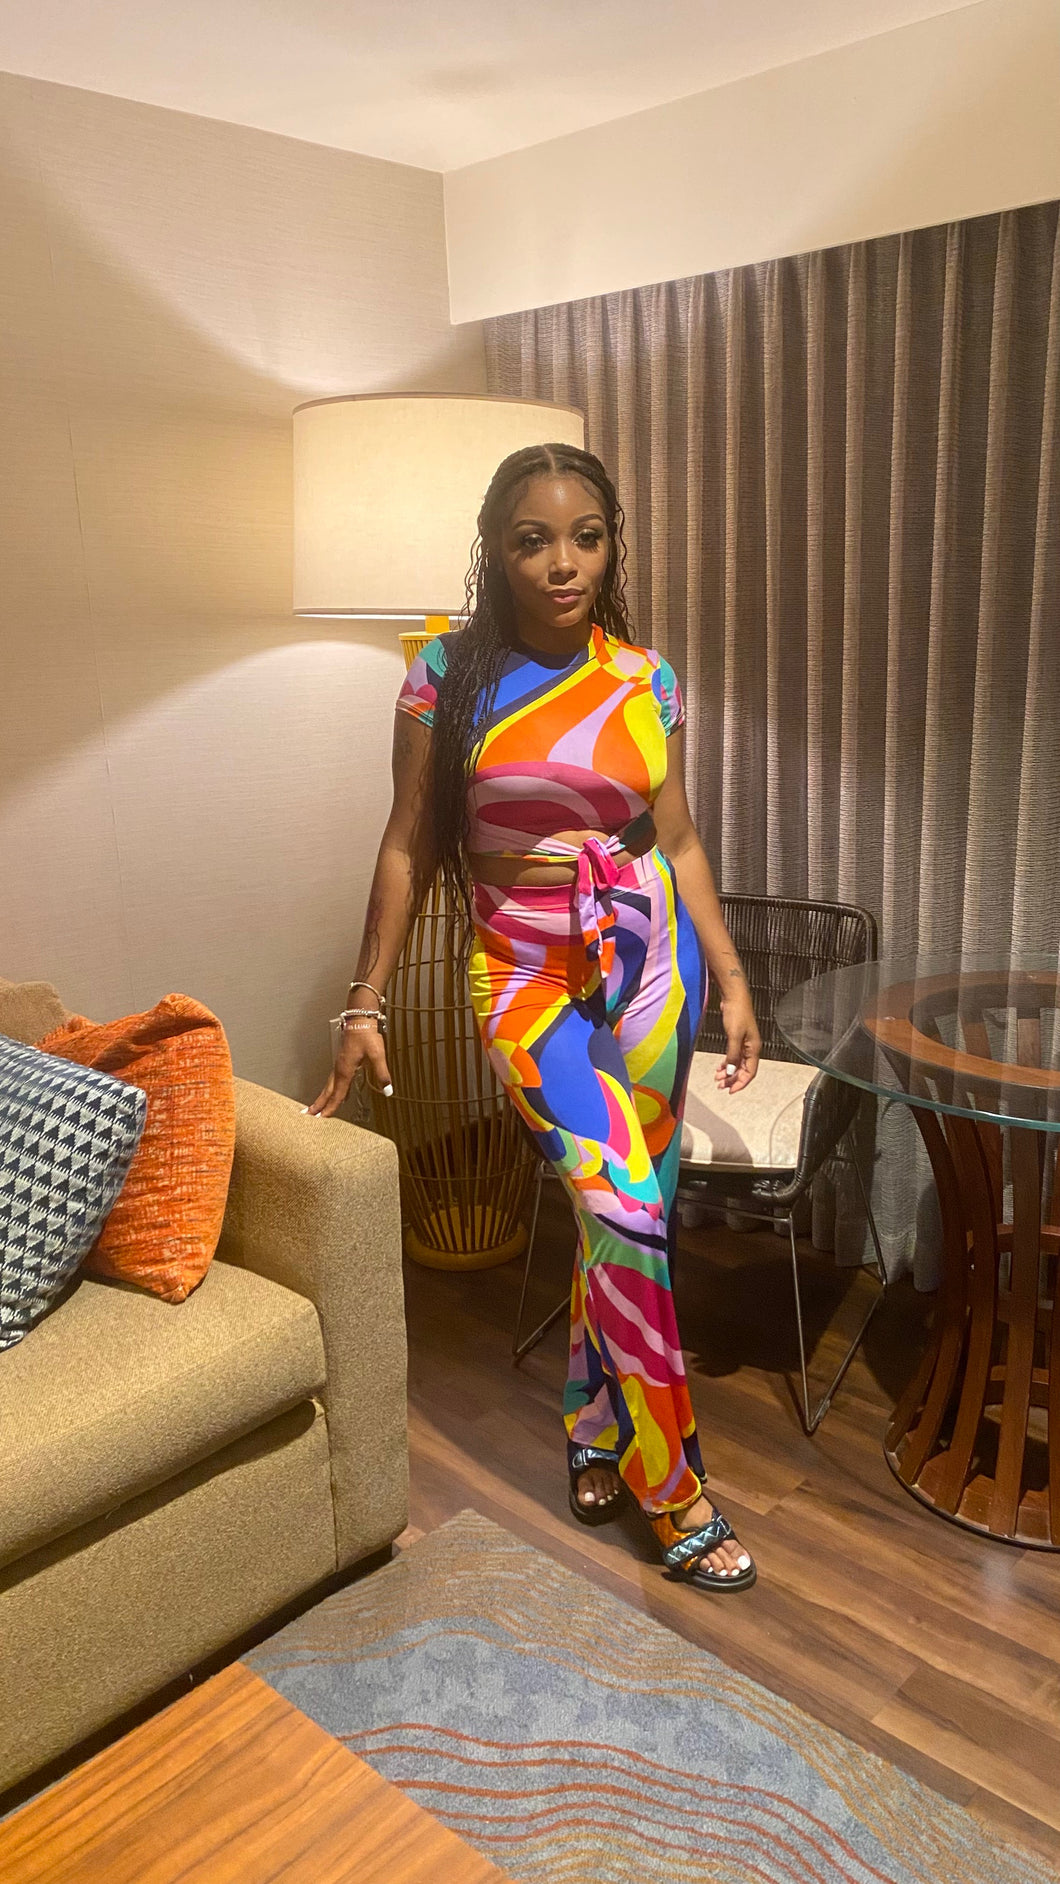 Colorful Two Piece Set